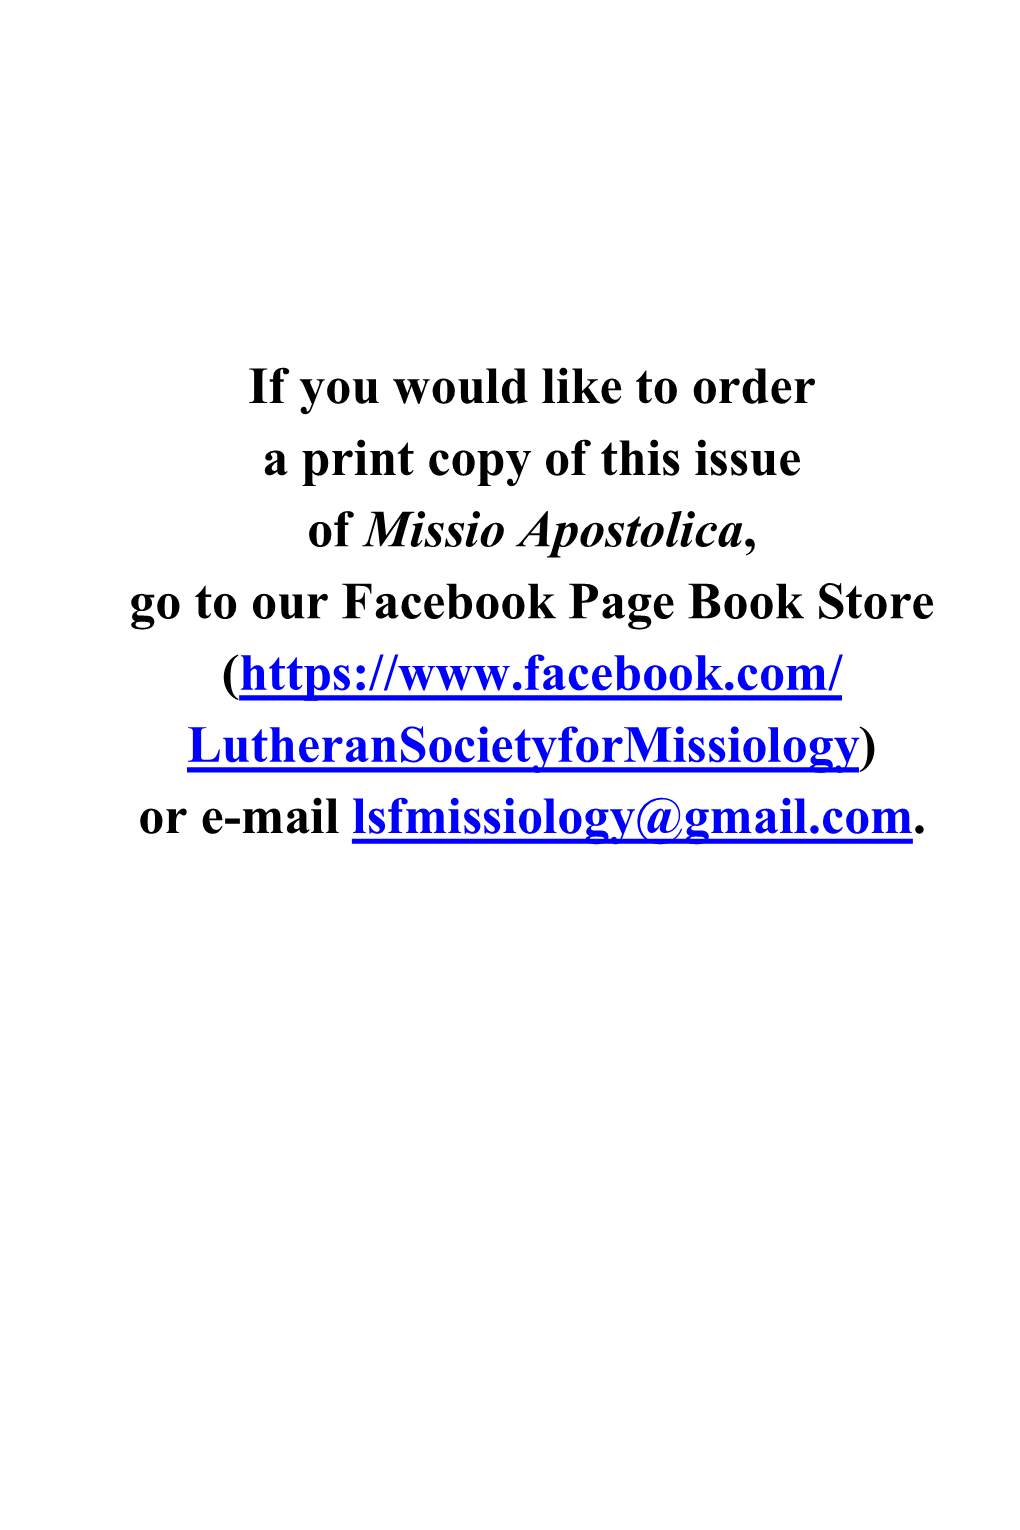 If You Would Like to Order a Print Copy of This Issue of Missio Apostolica, Go to Our Facebook Page Book Store (